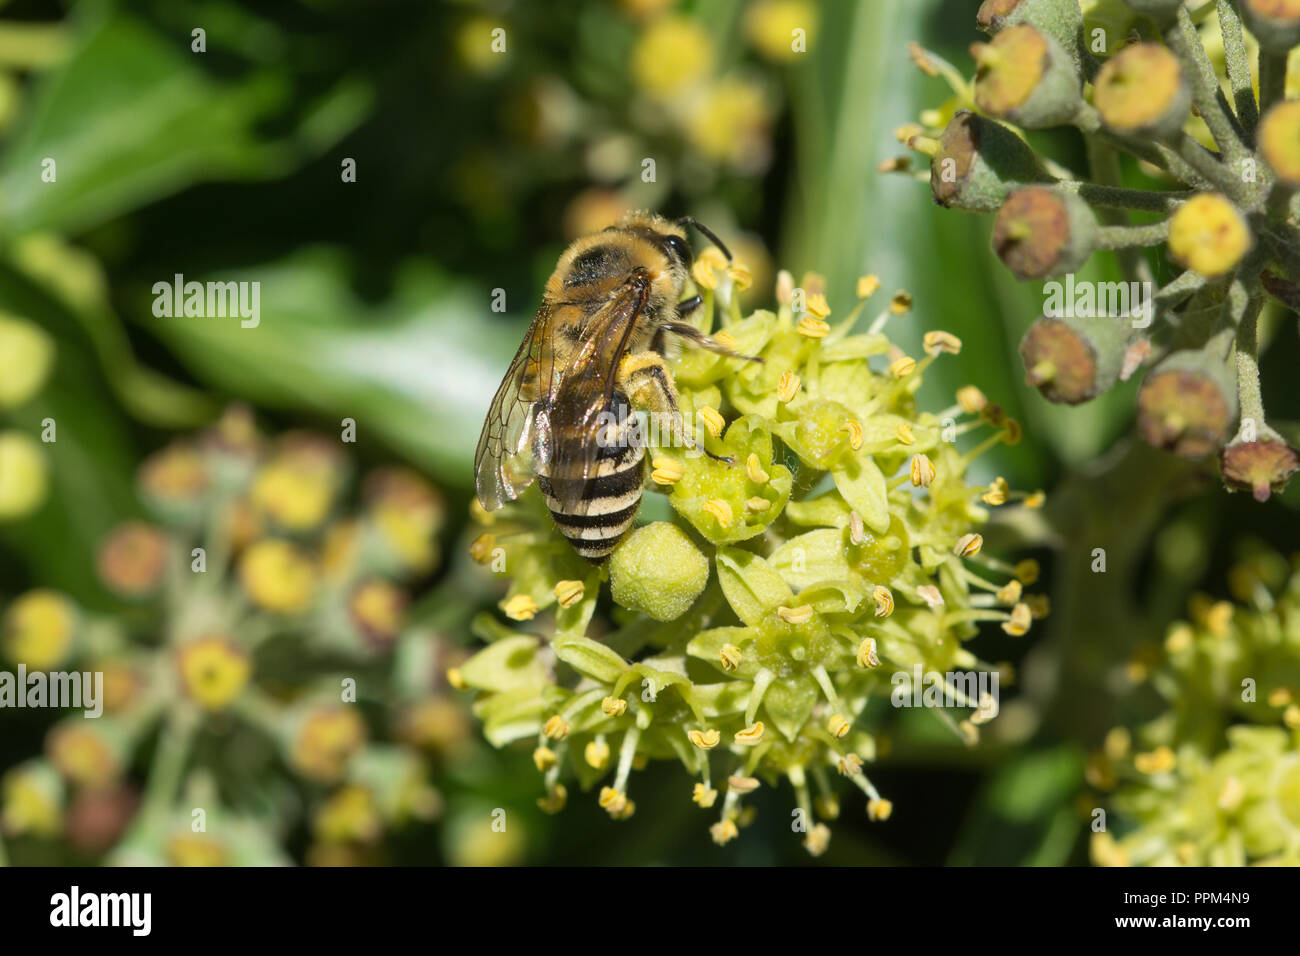 Ivy bee (Colletes hederae) feeding on nectar of ivy flowers (Hedera helix) in late September and collecting pollen, England, UK Stock Photo